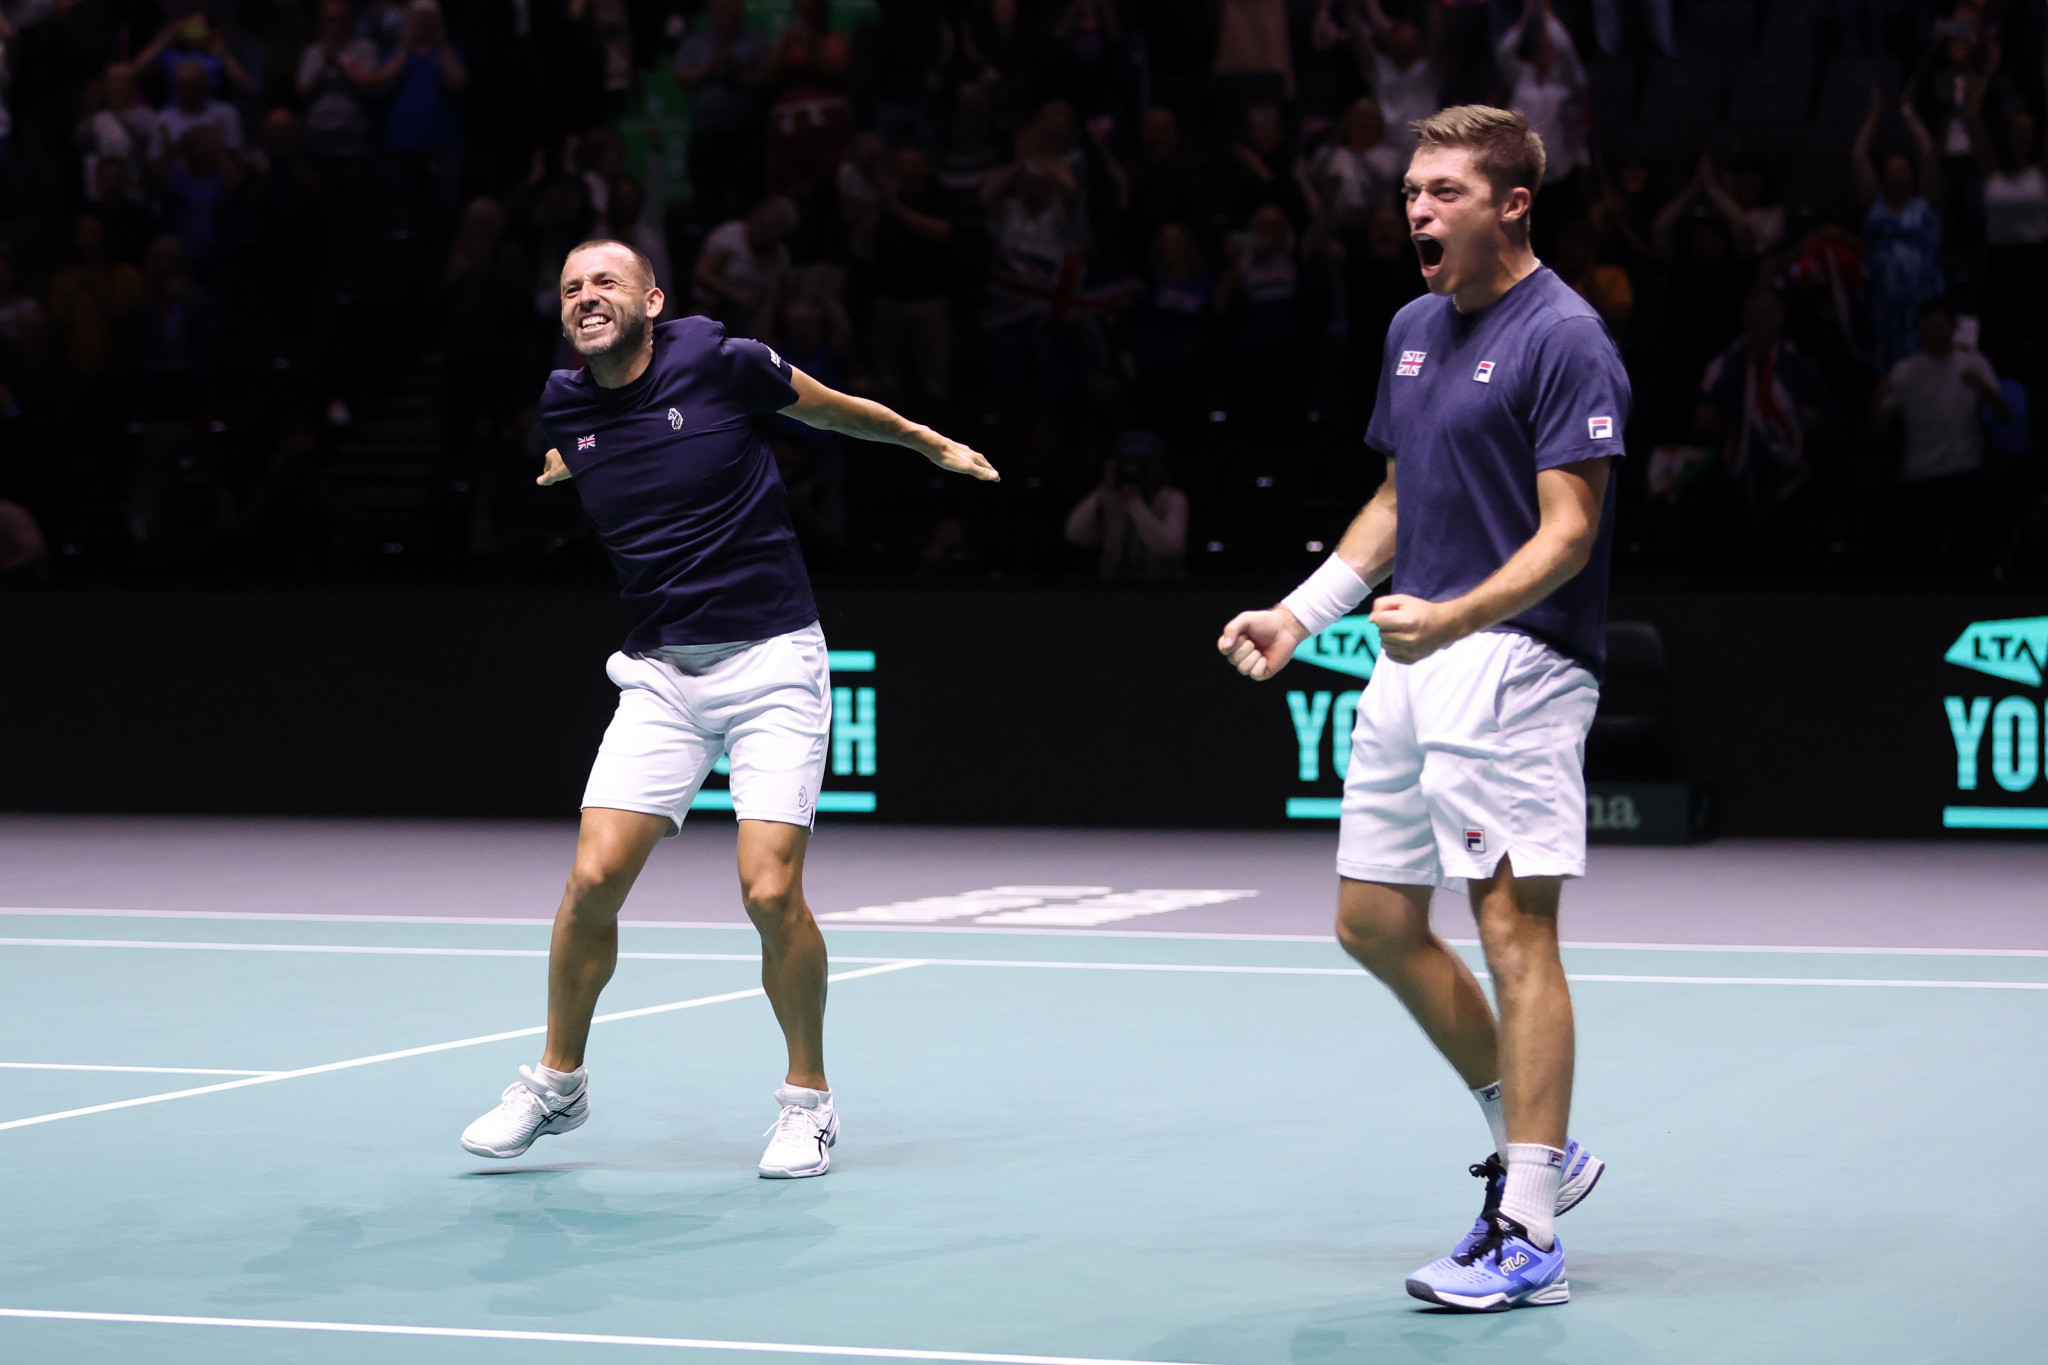 Britan punched their ticket thanks to Dan Evans, left, and Neal Skupski ©Getty Images